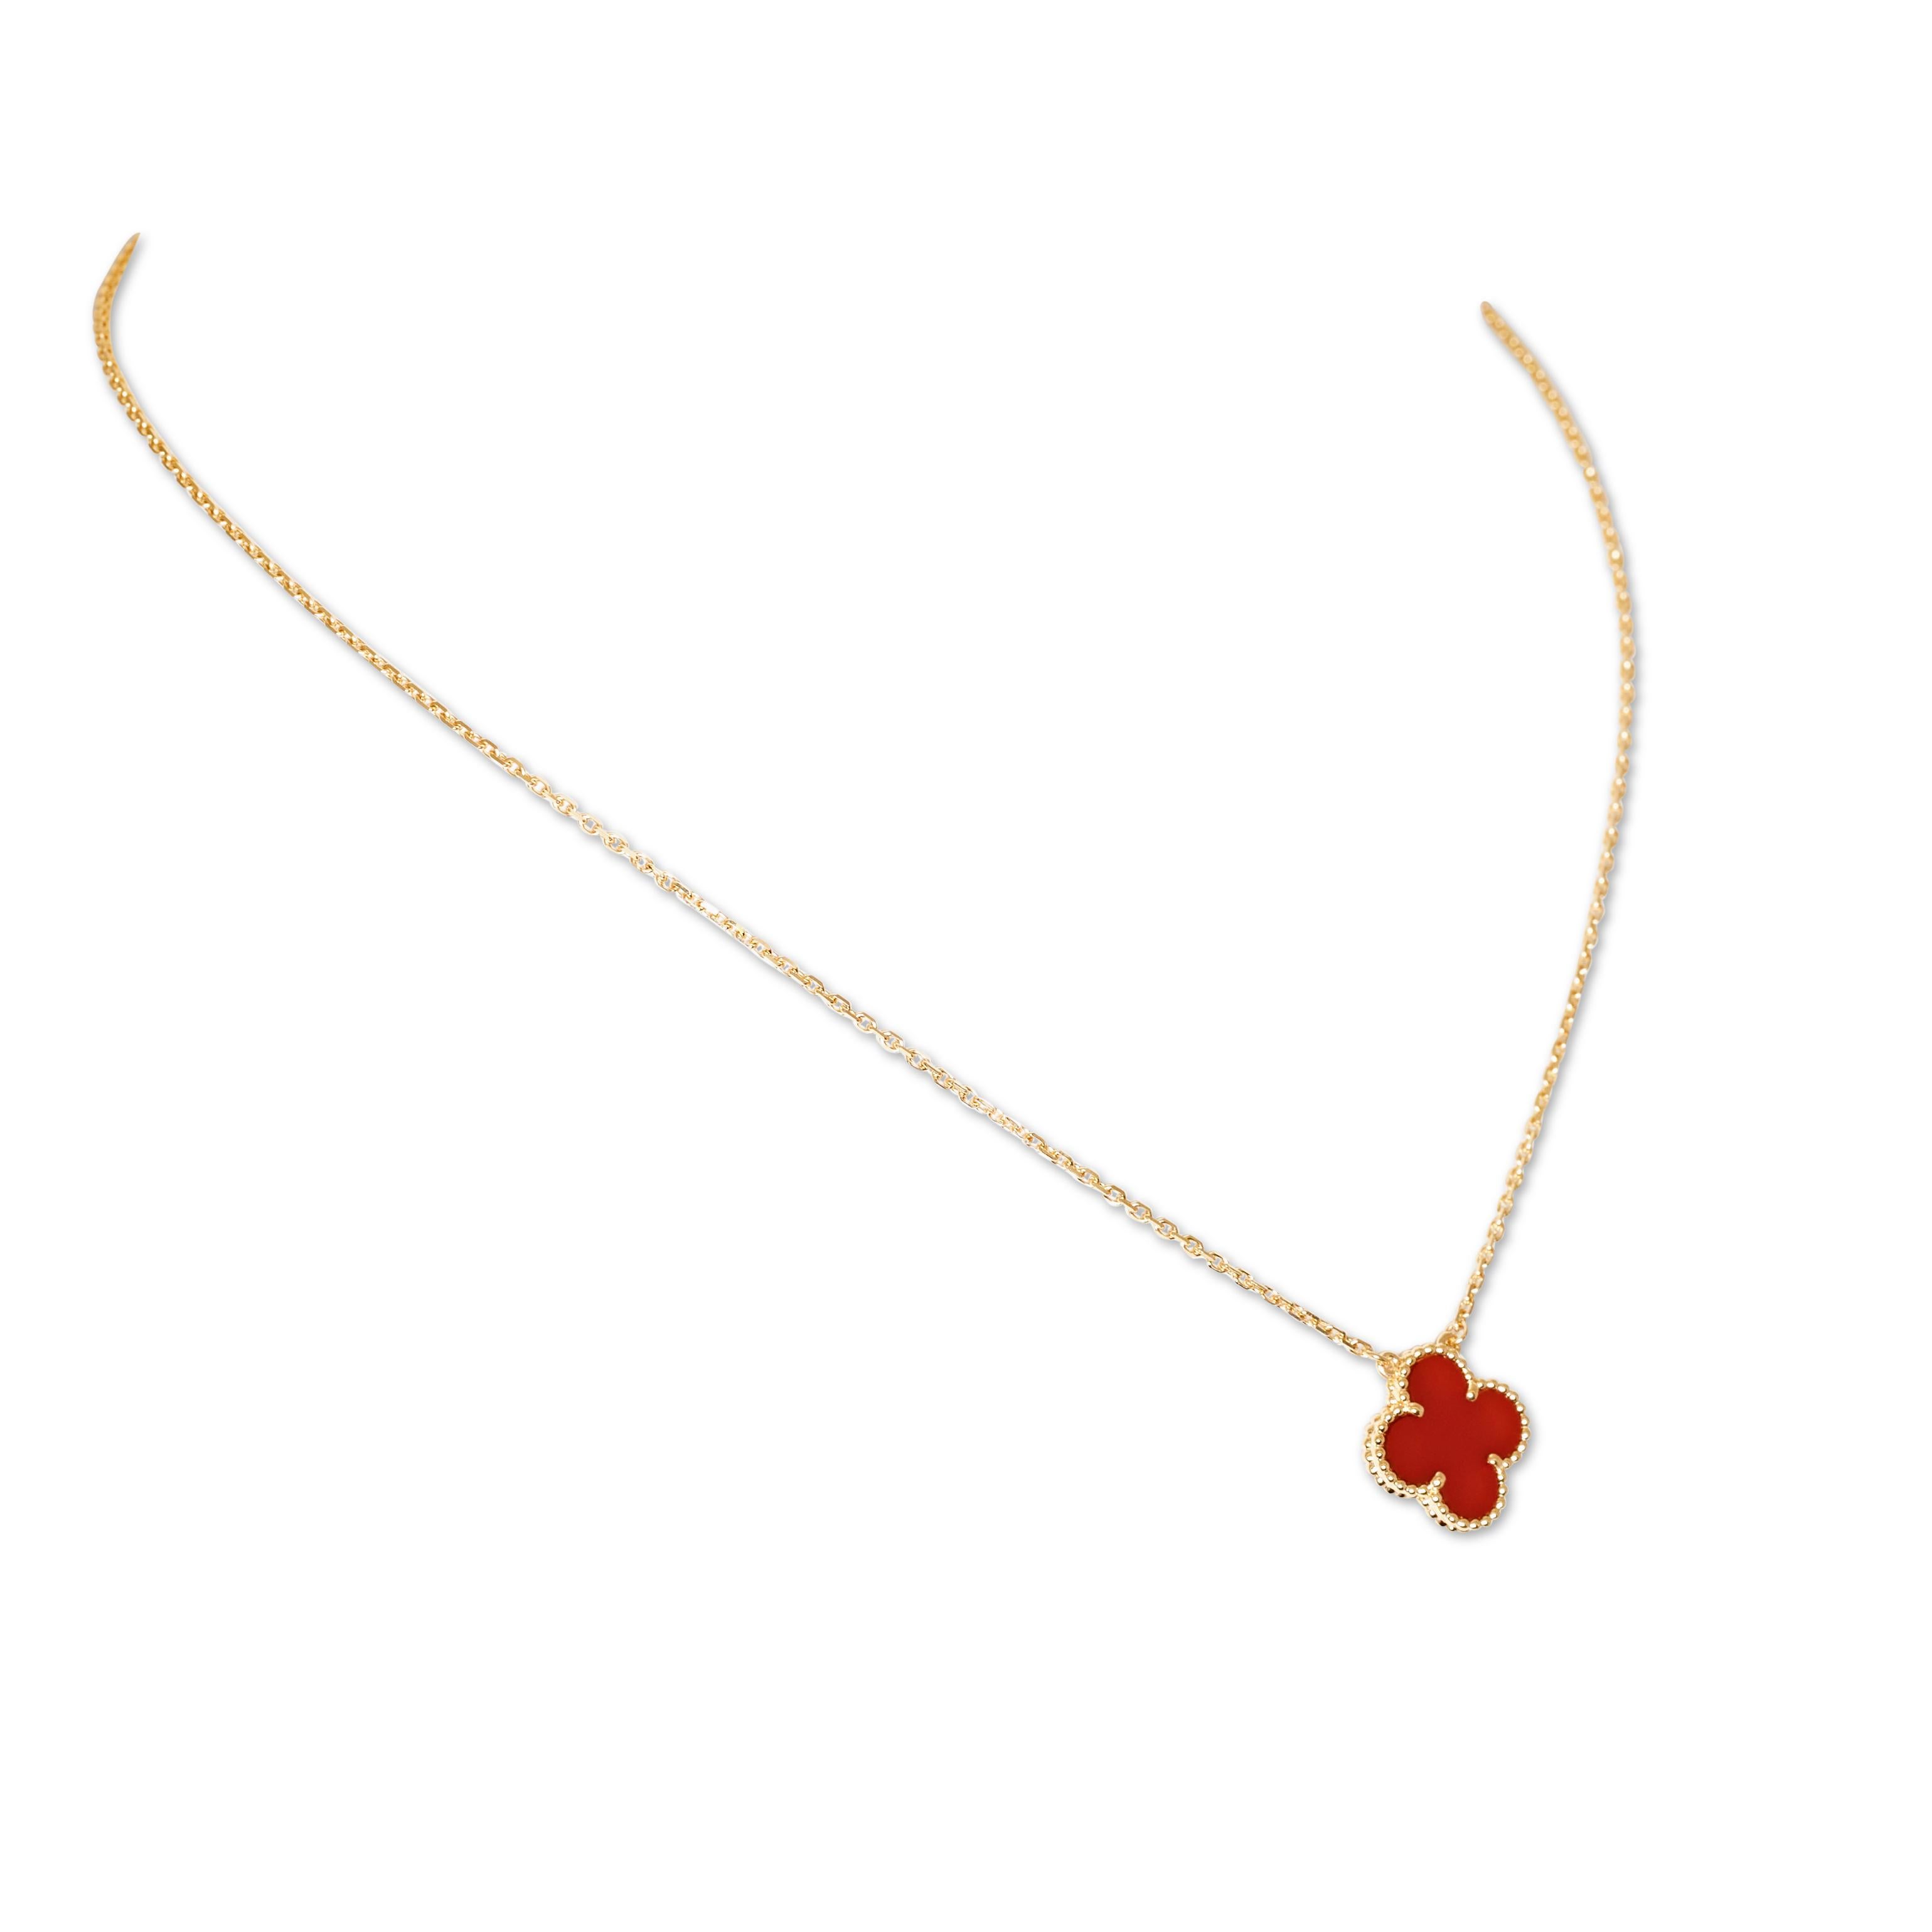 Authentic Van Cleef & Arpels 'Vintage Alhambra' necklace crafted in 18 karat yellow gold and featuring one clover-shaped motif in carved carnelian. The pendant hangs from a 16.5 inch adjustable chain.  Signed VCA, Au750, with serial number and